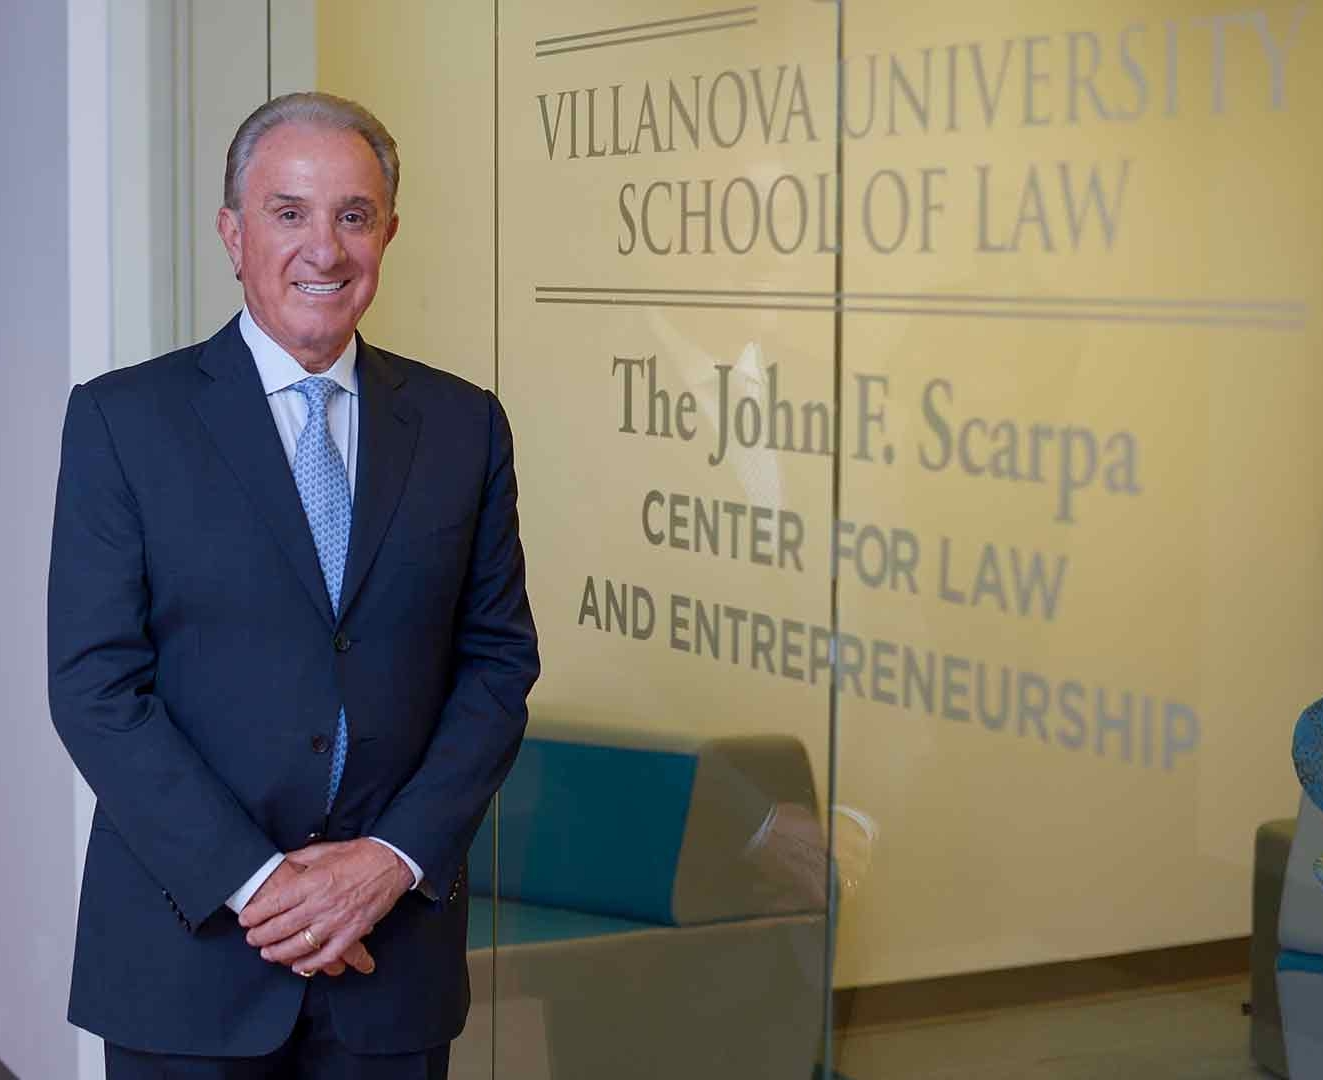 John F. Scarpa in front of the Center for Law and Interpreneurship